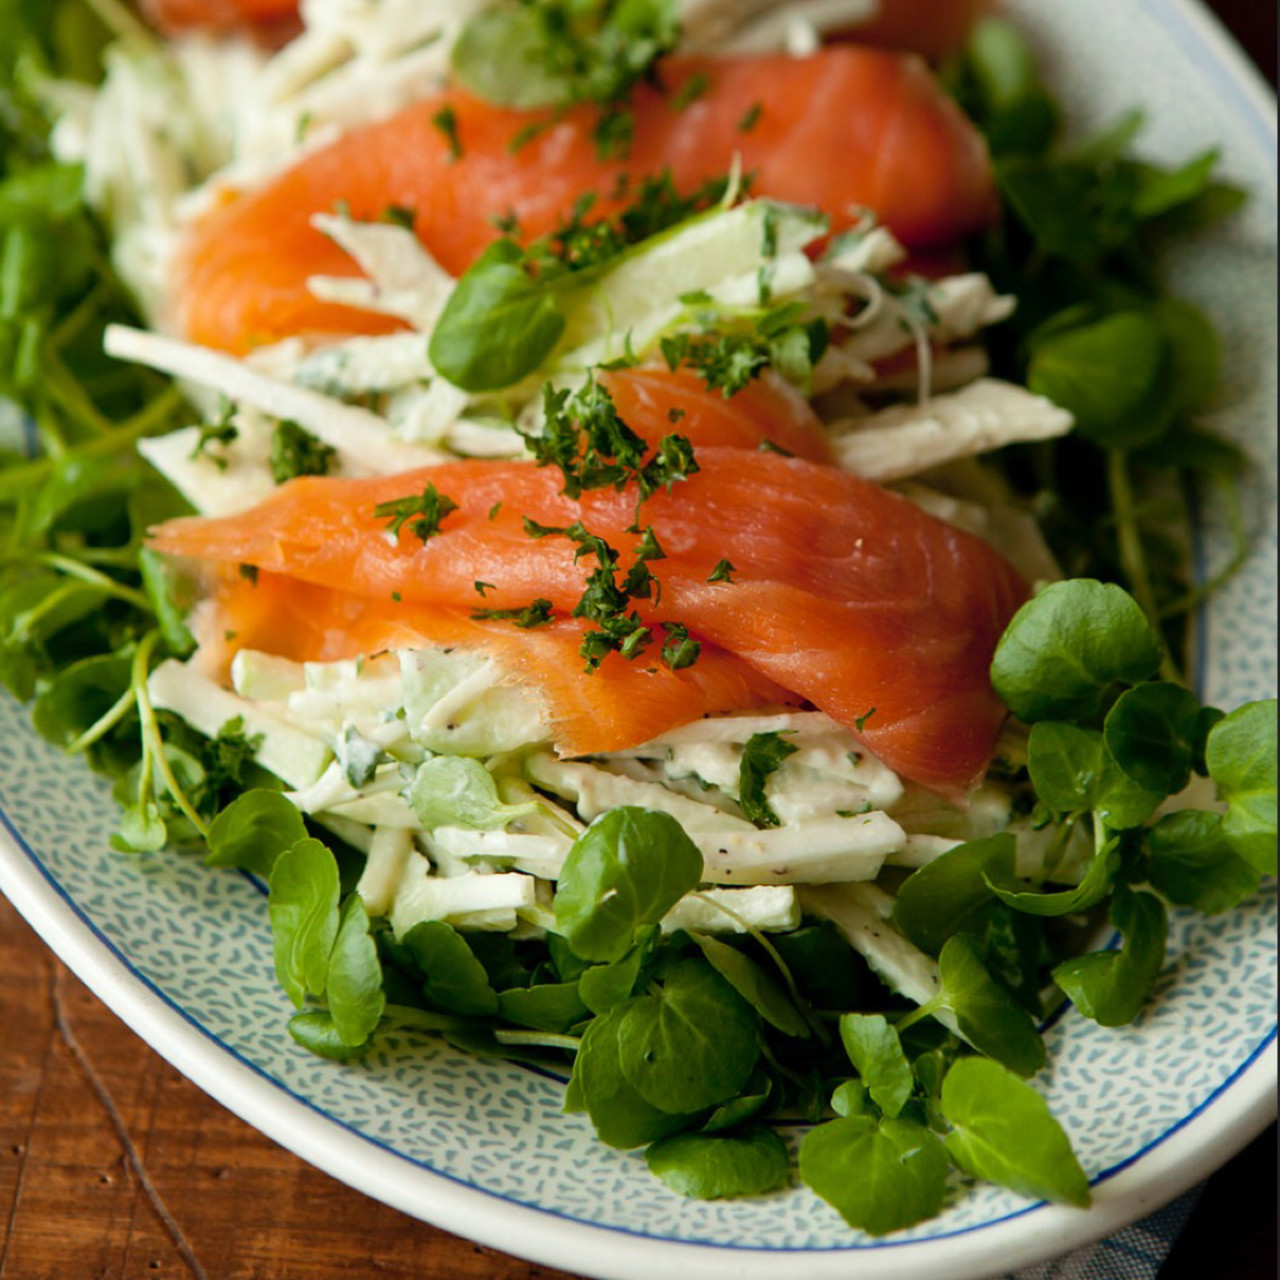 Apple celeriac remoulade on watercress topped with salmon